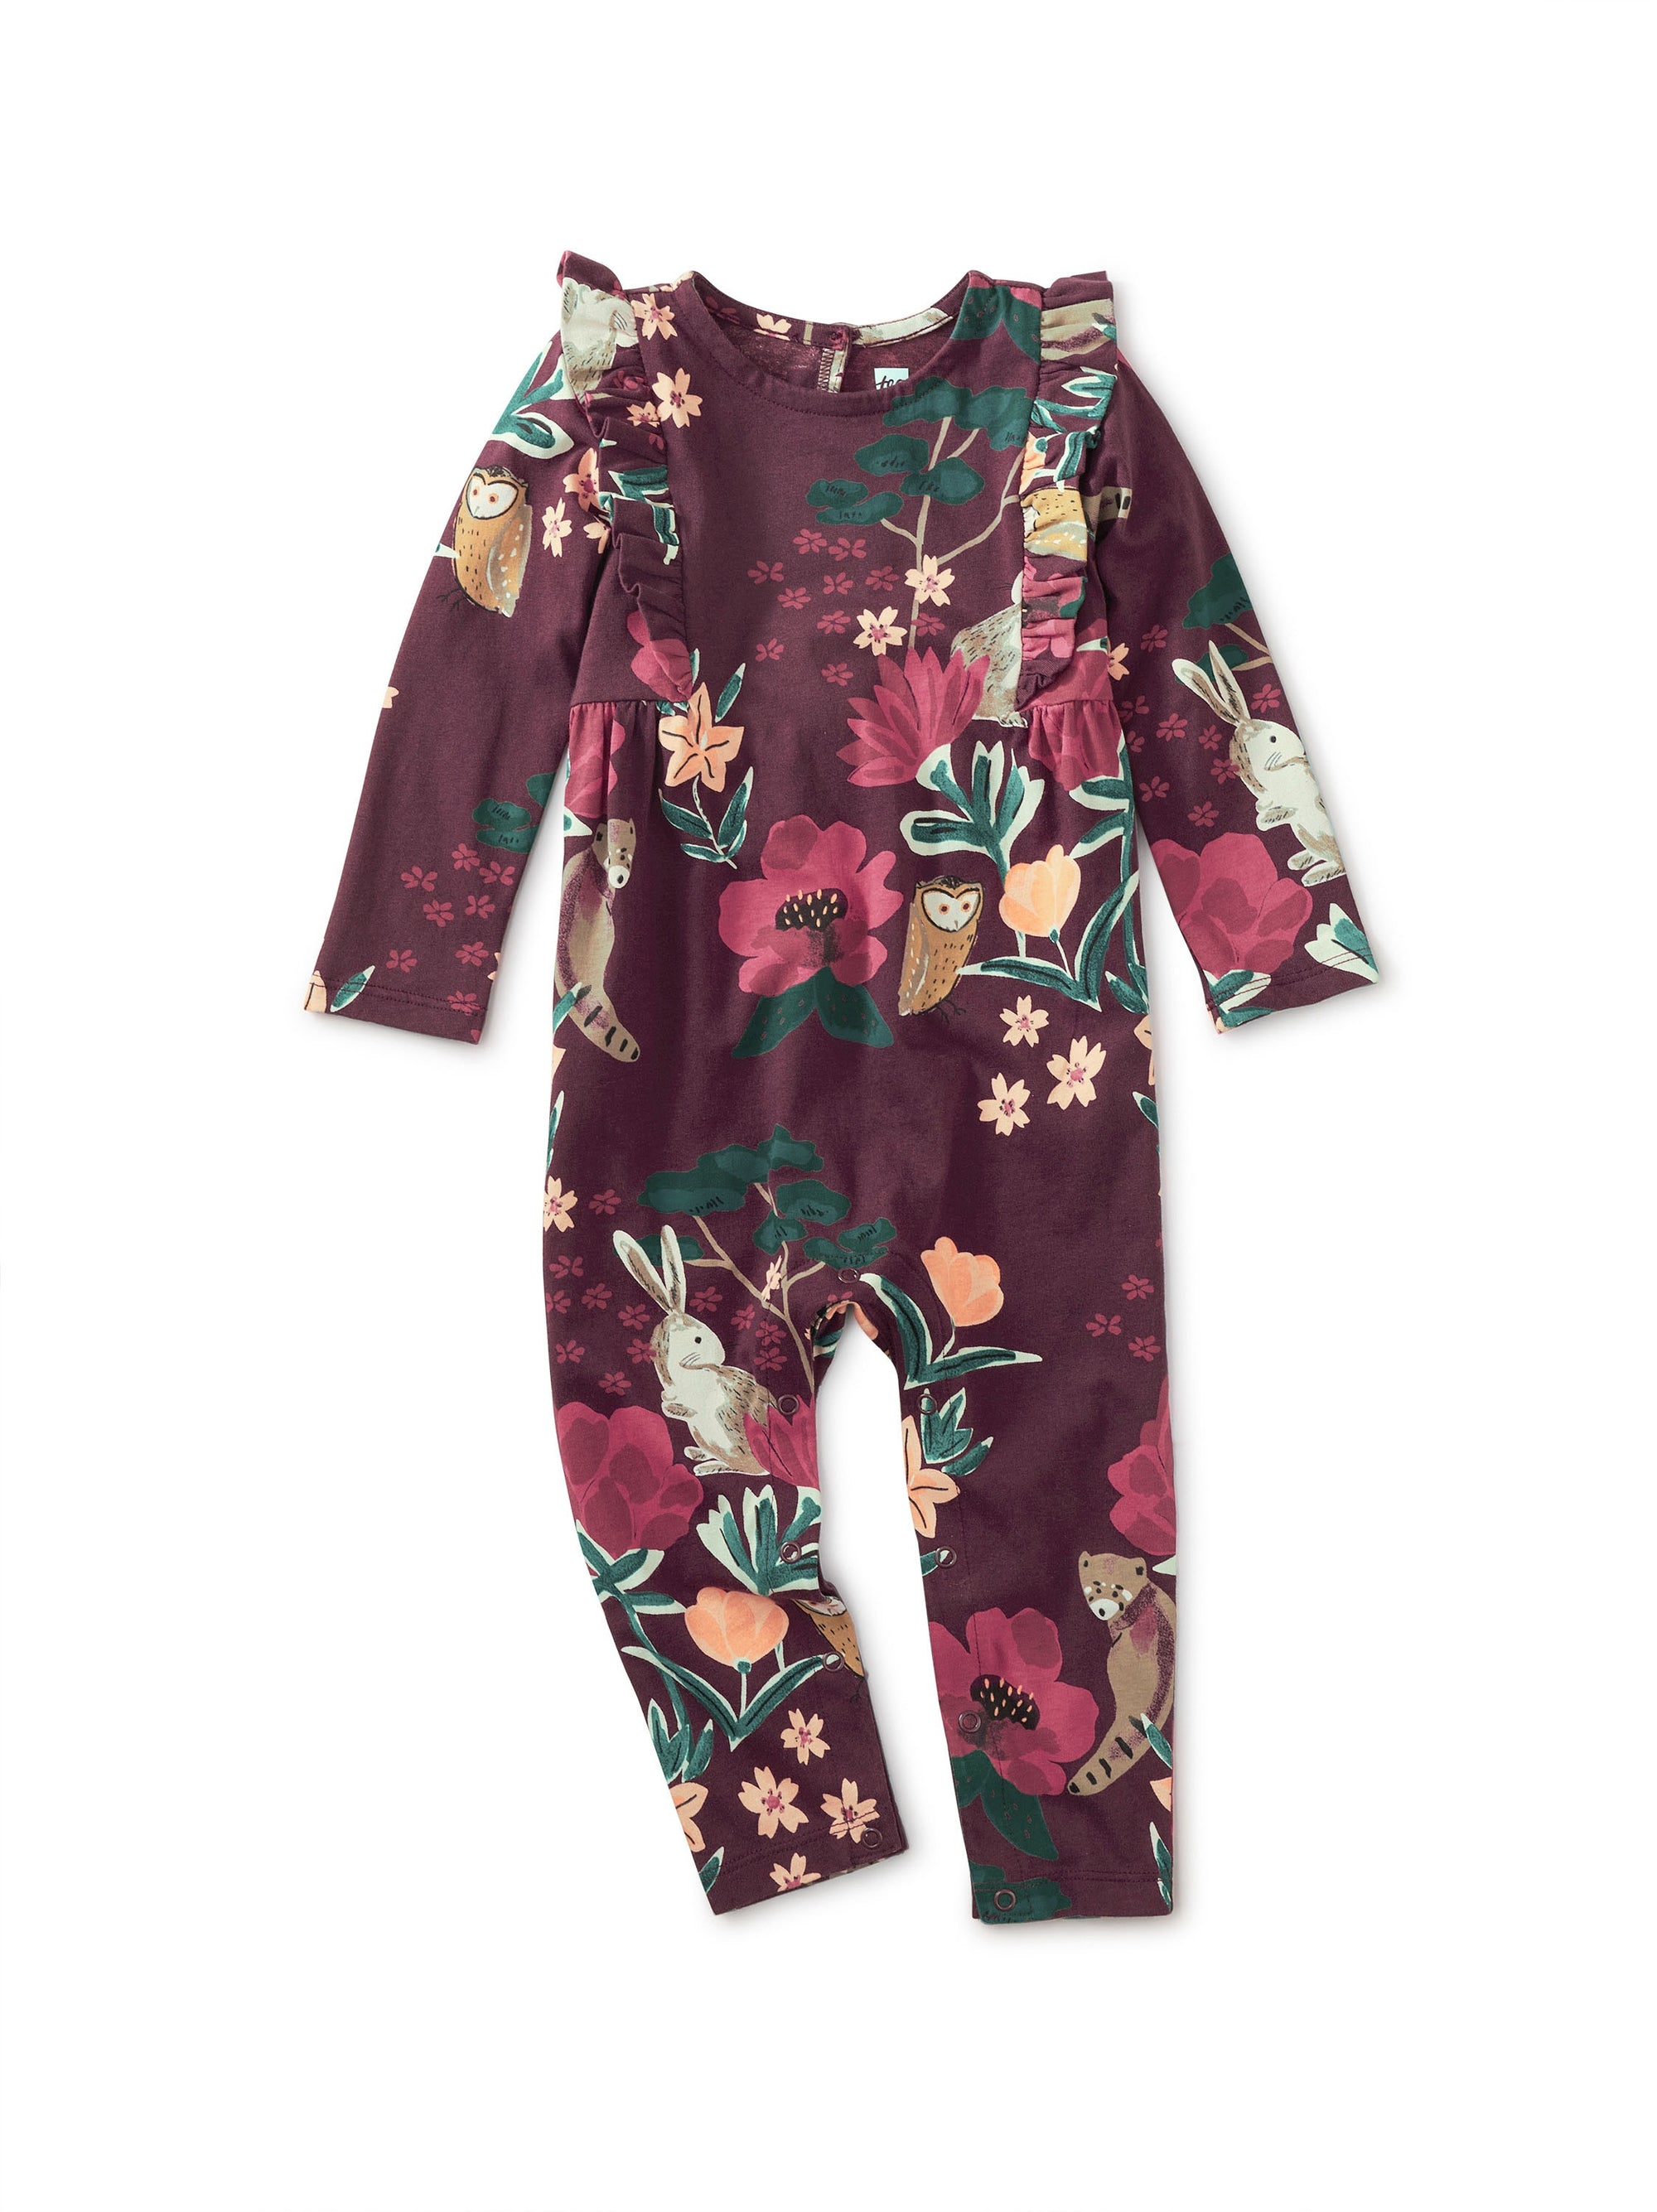 Ruffle Baby Romper - Forest Floral Red